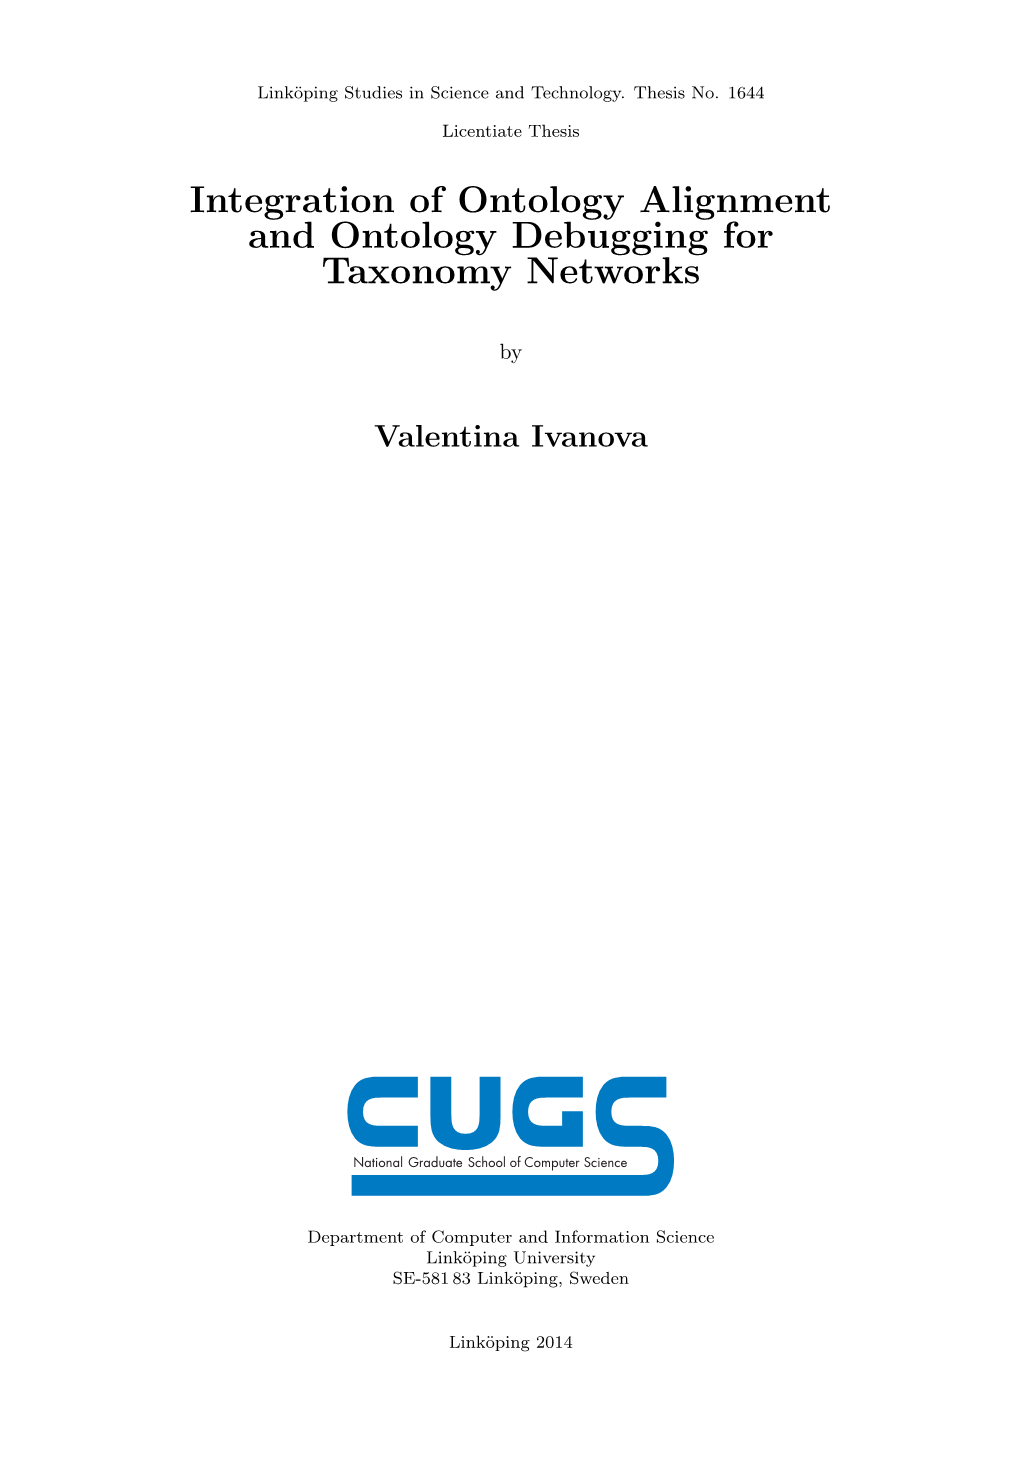 Integration of Ontology Alignment and Ontology Debugging for Taxonomy Networks